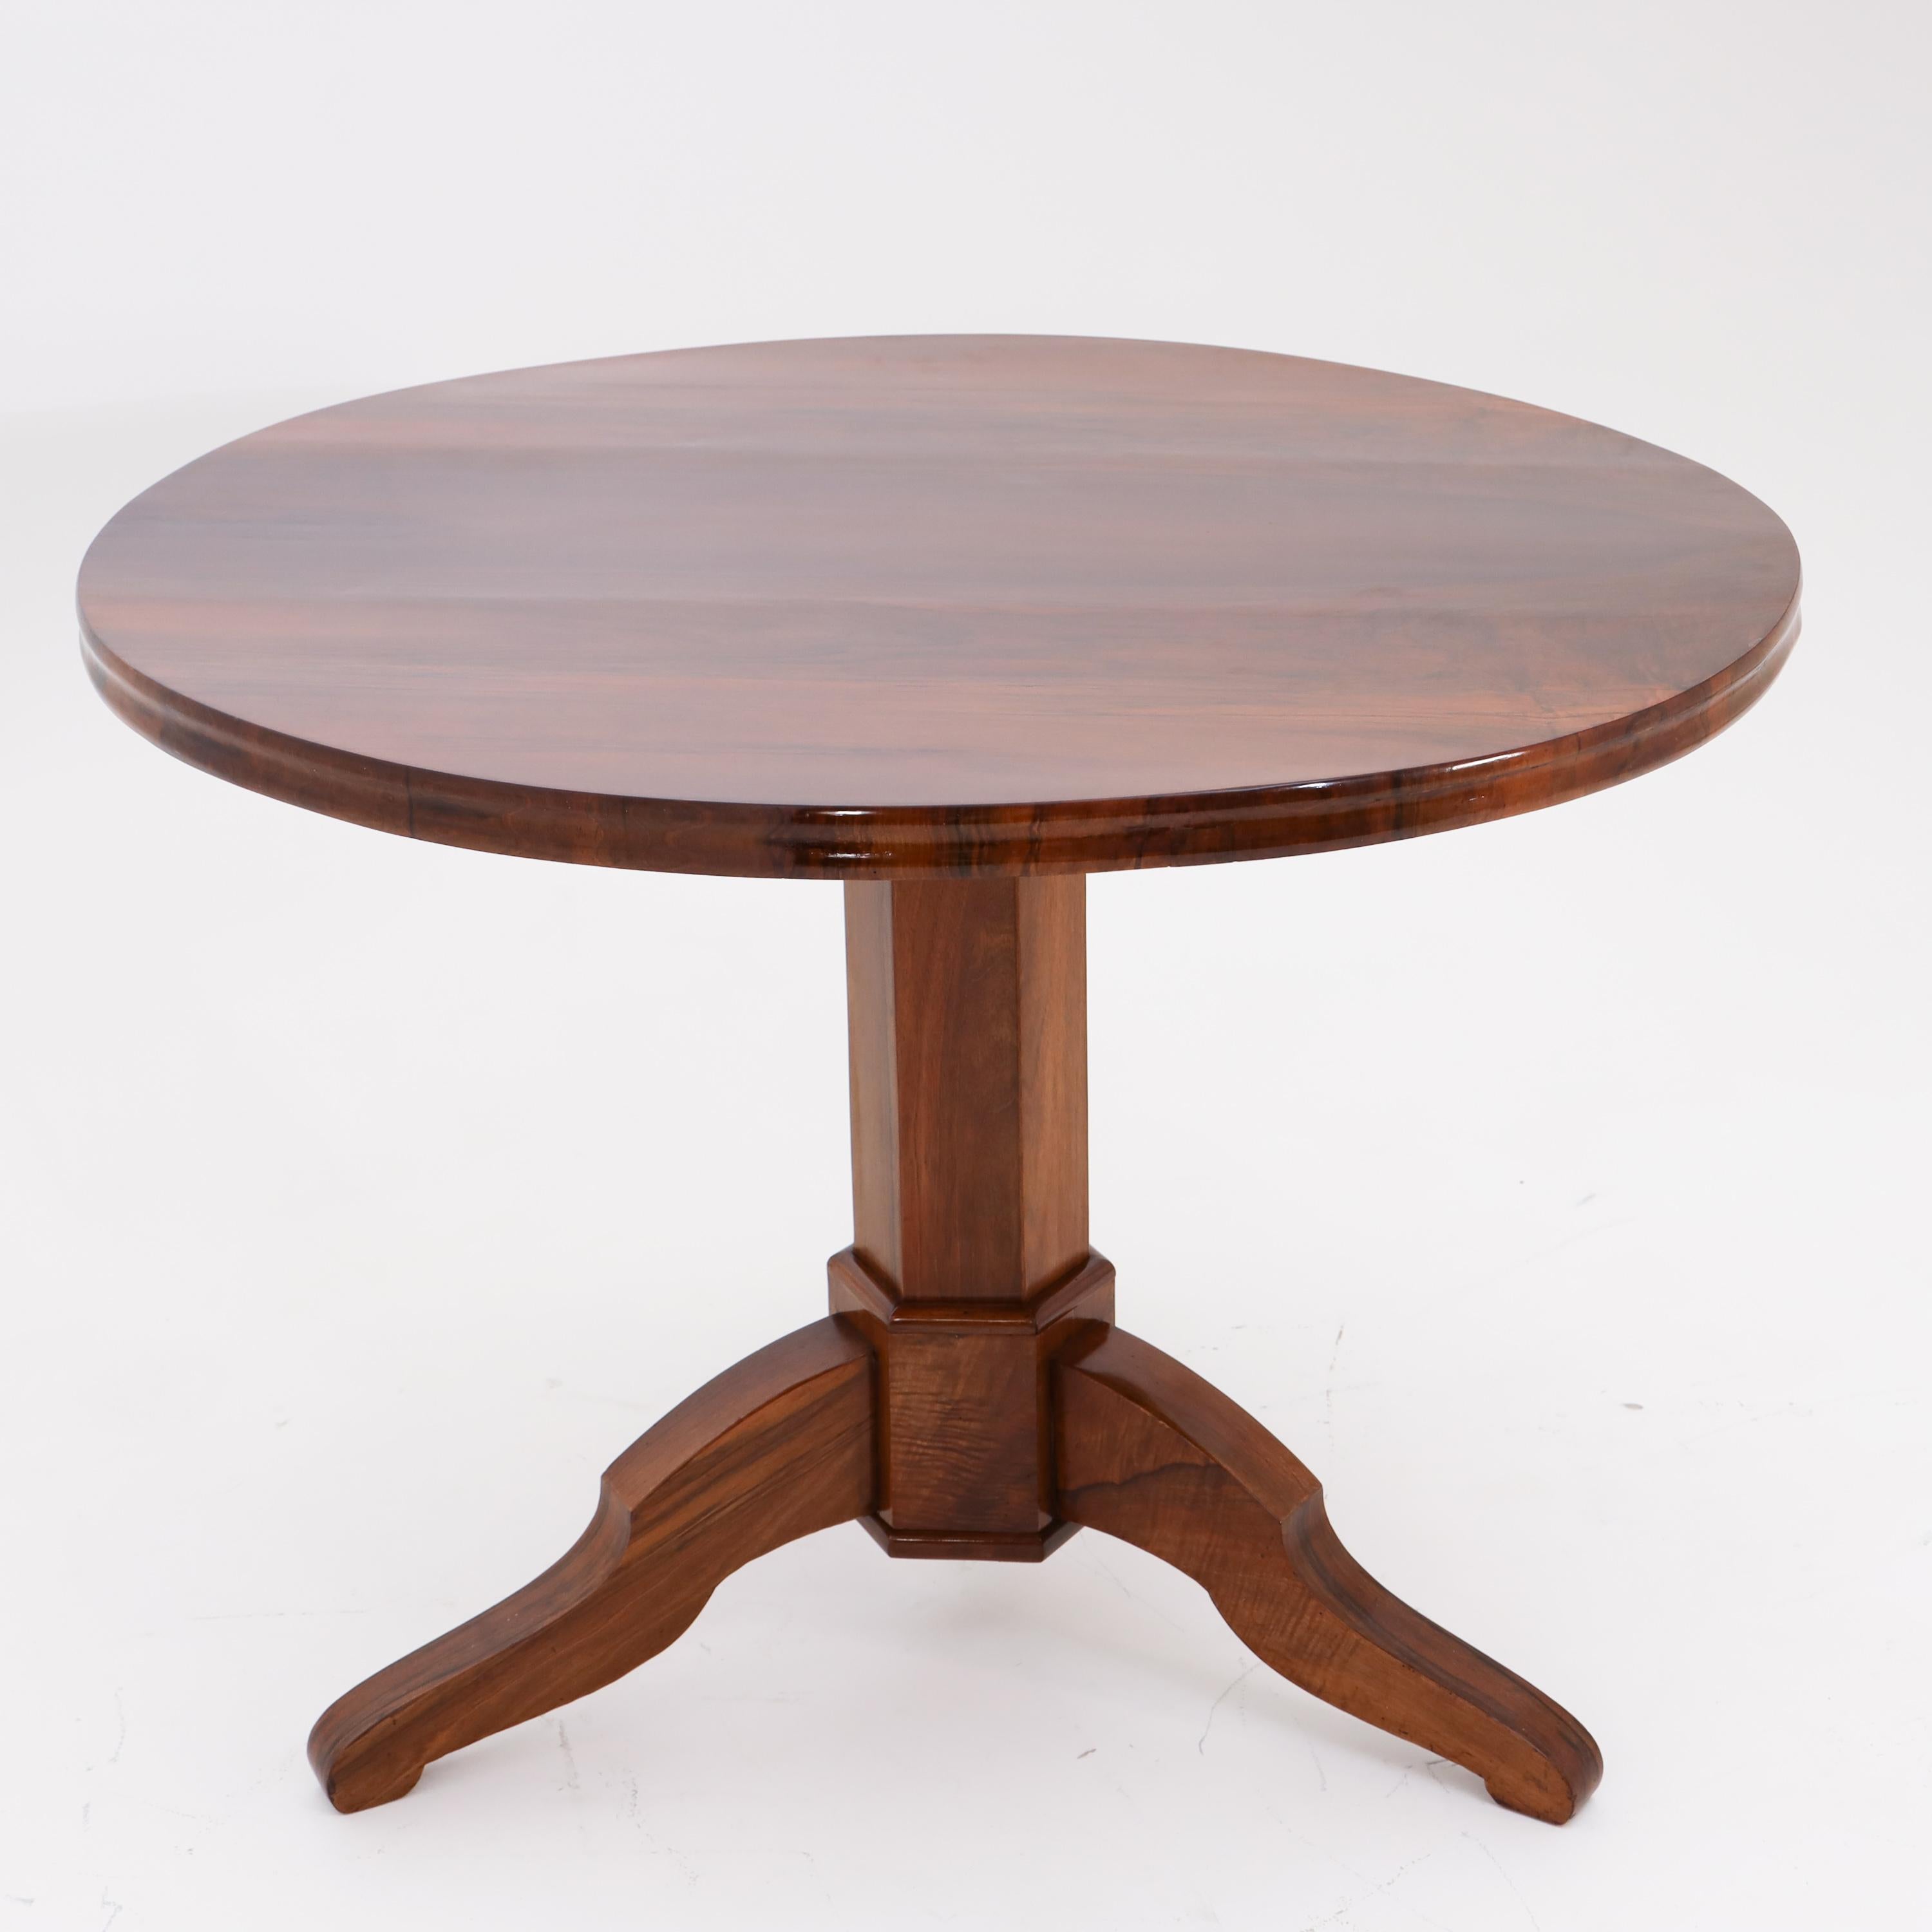 Biedermeier salon table on three S-shaped legs around a hexagonal column base and a round tabletop with a slight chamfer.